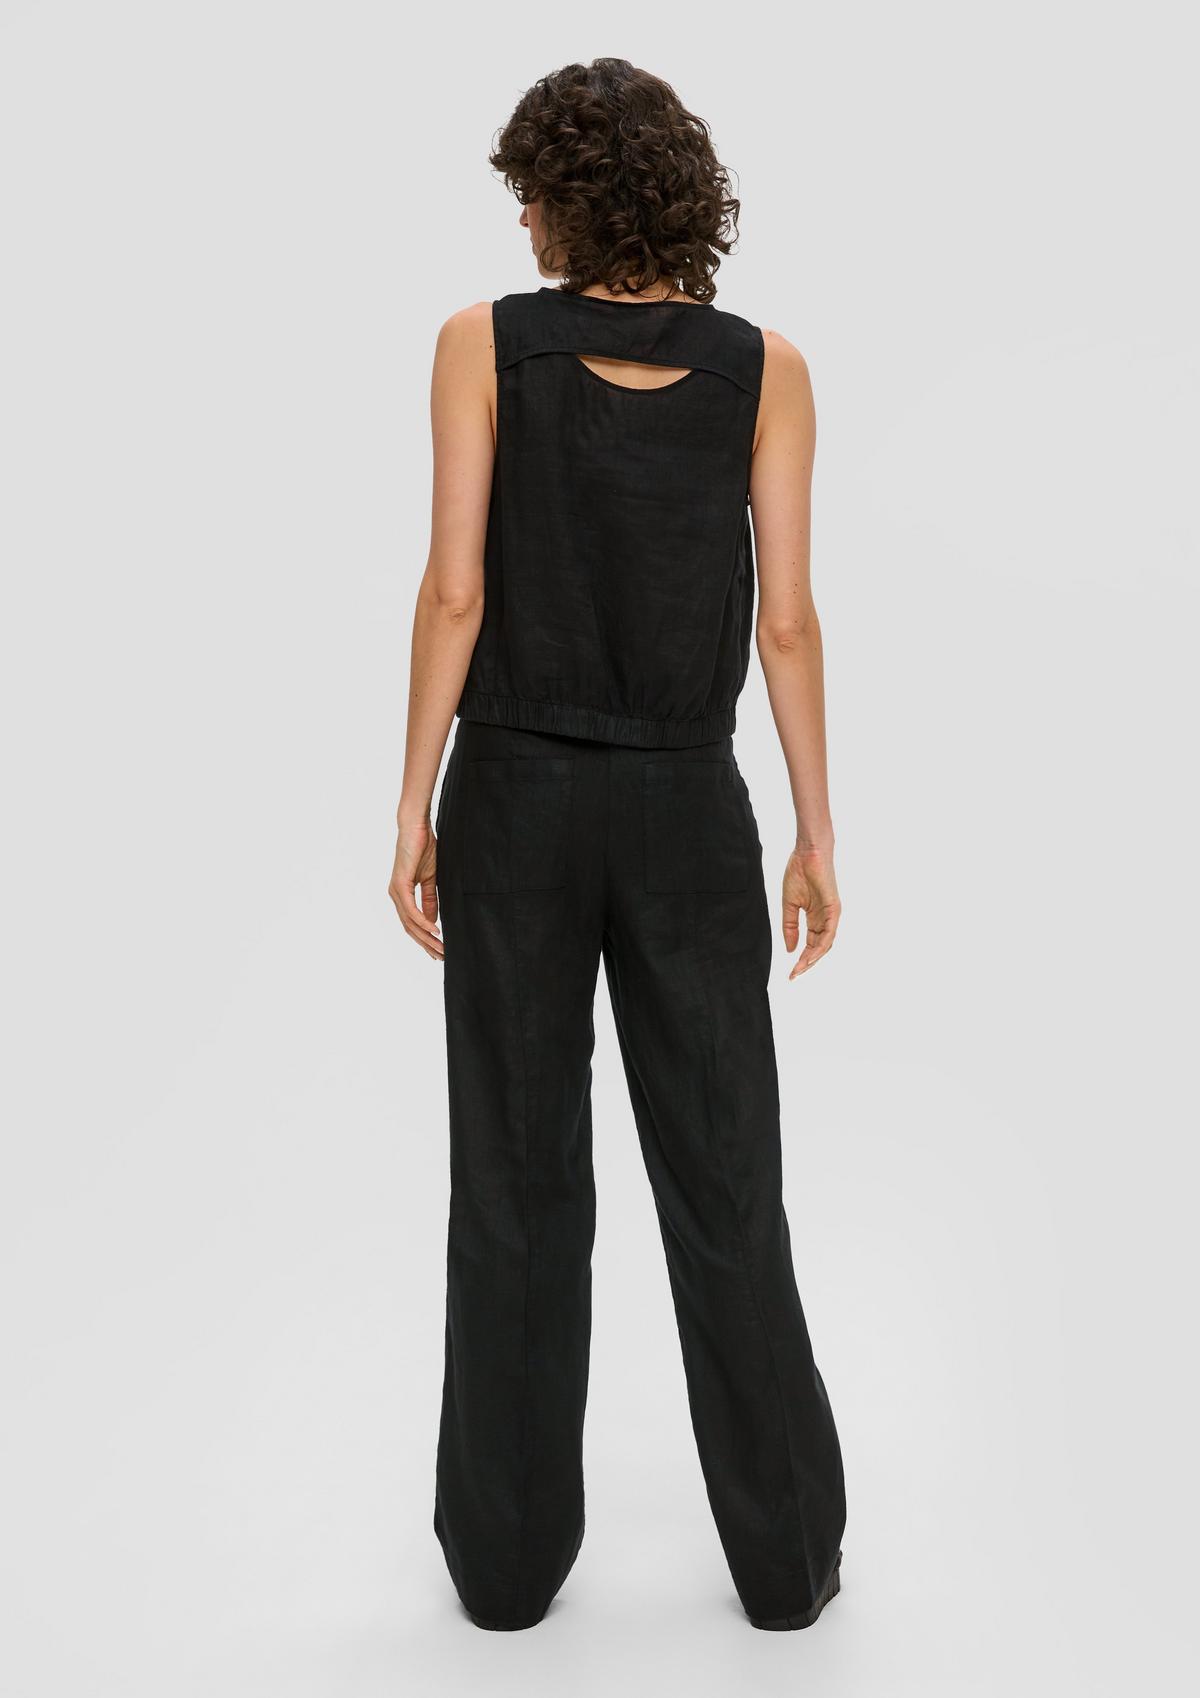 s.Oliver Blouse top with a back neckline